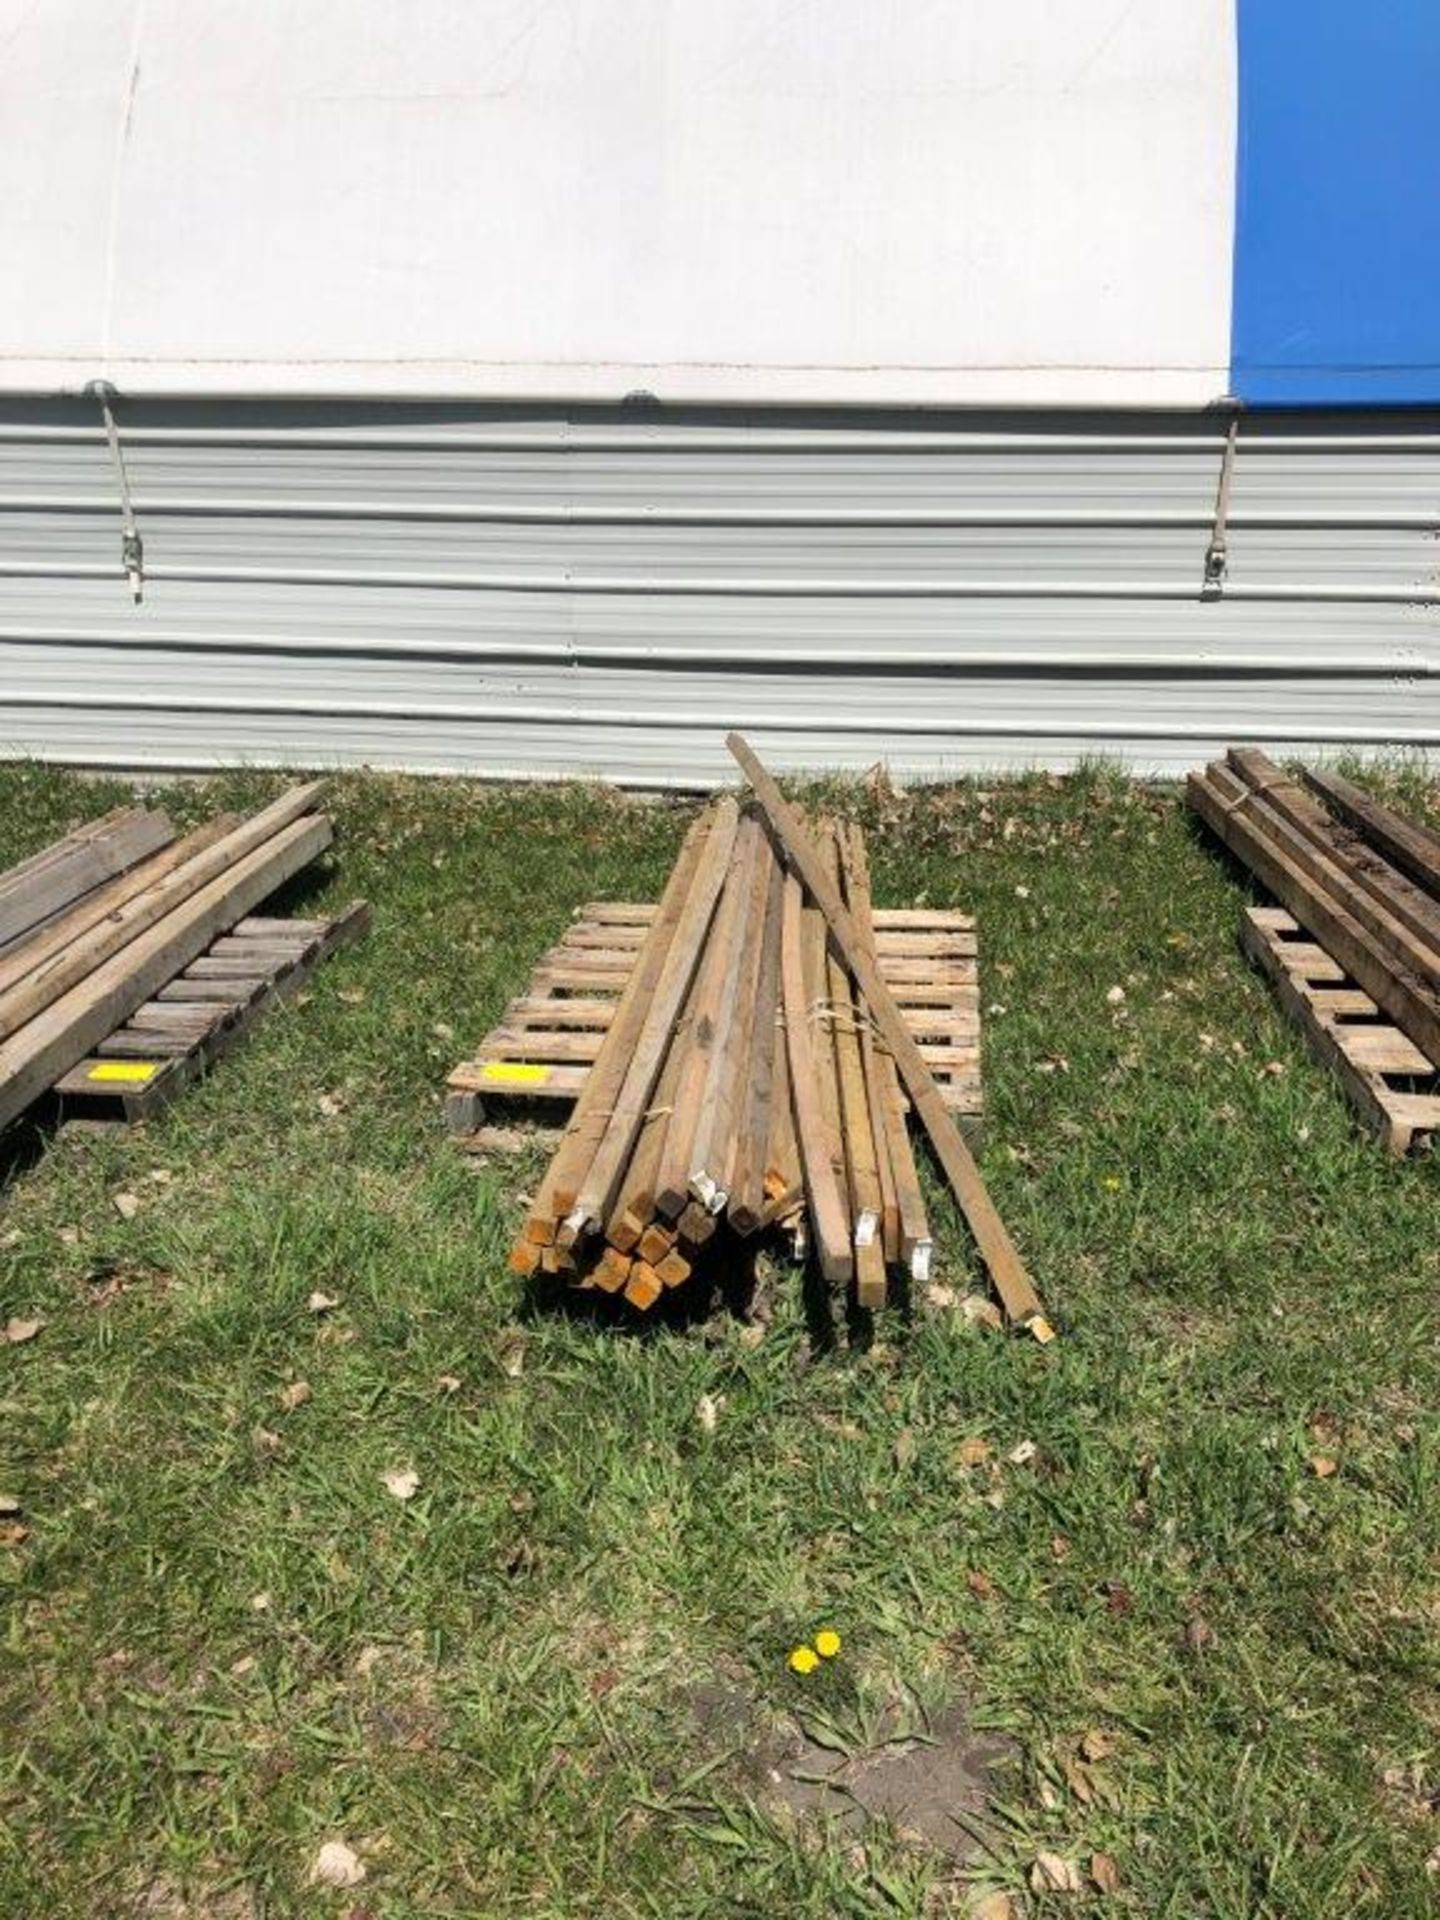 2-6"X6"X12FT TREATED POSTS AND ASSORTED LUMBER - Image 4 of 5